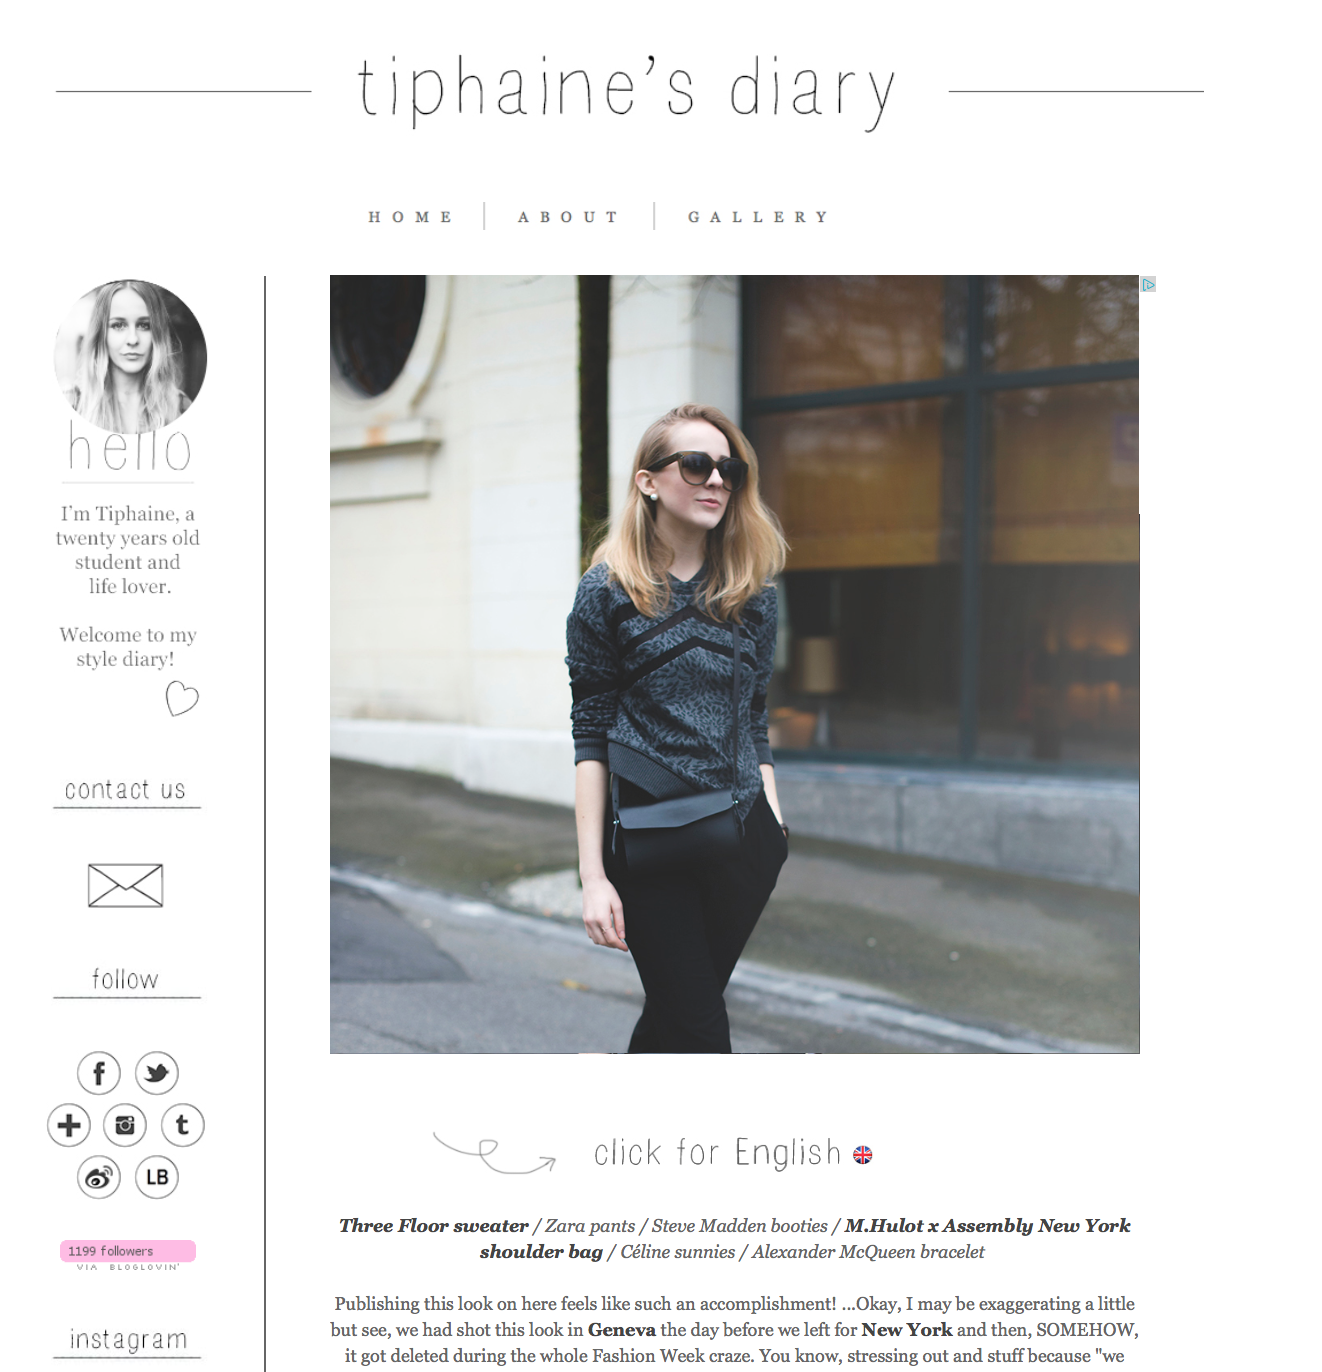 Tiphaine's Diary